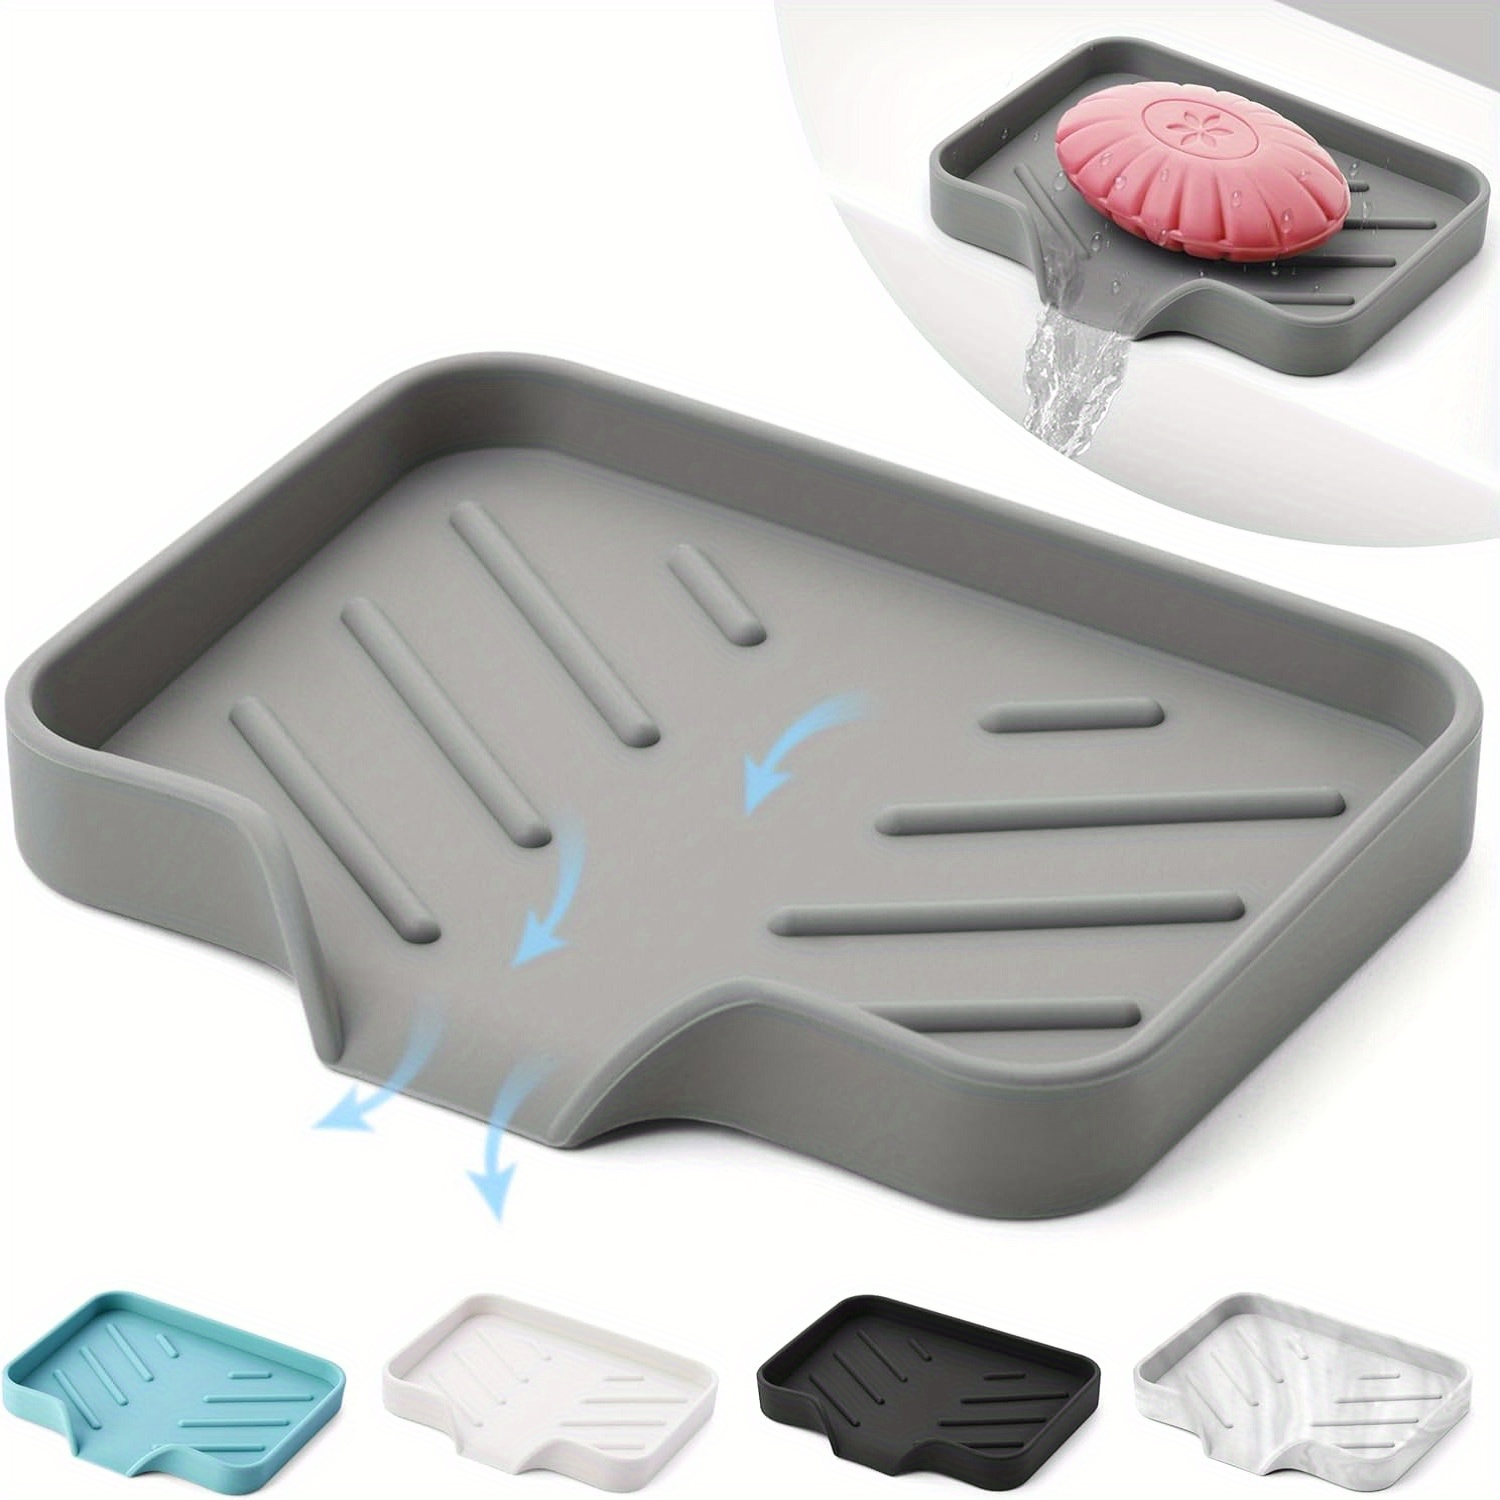 

1pc Silicone Soap Dish, Sink Soap Tray, Self Draining Soap Holder, Soap Rack For Bathroom, Soap Storage Rack, Bathroom Accessories